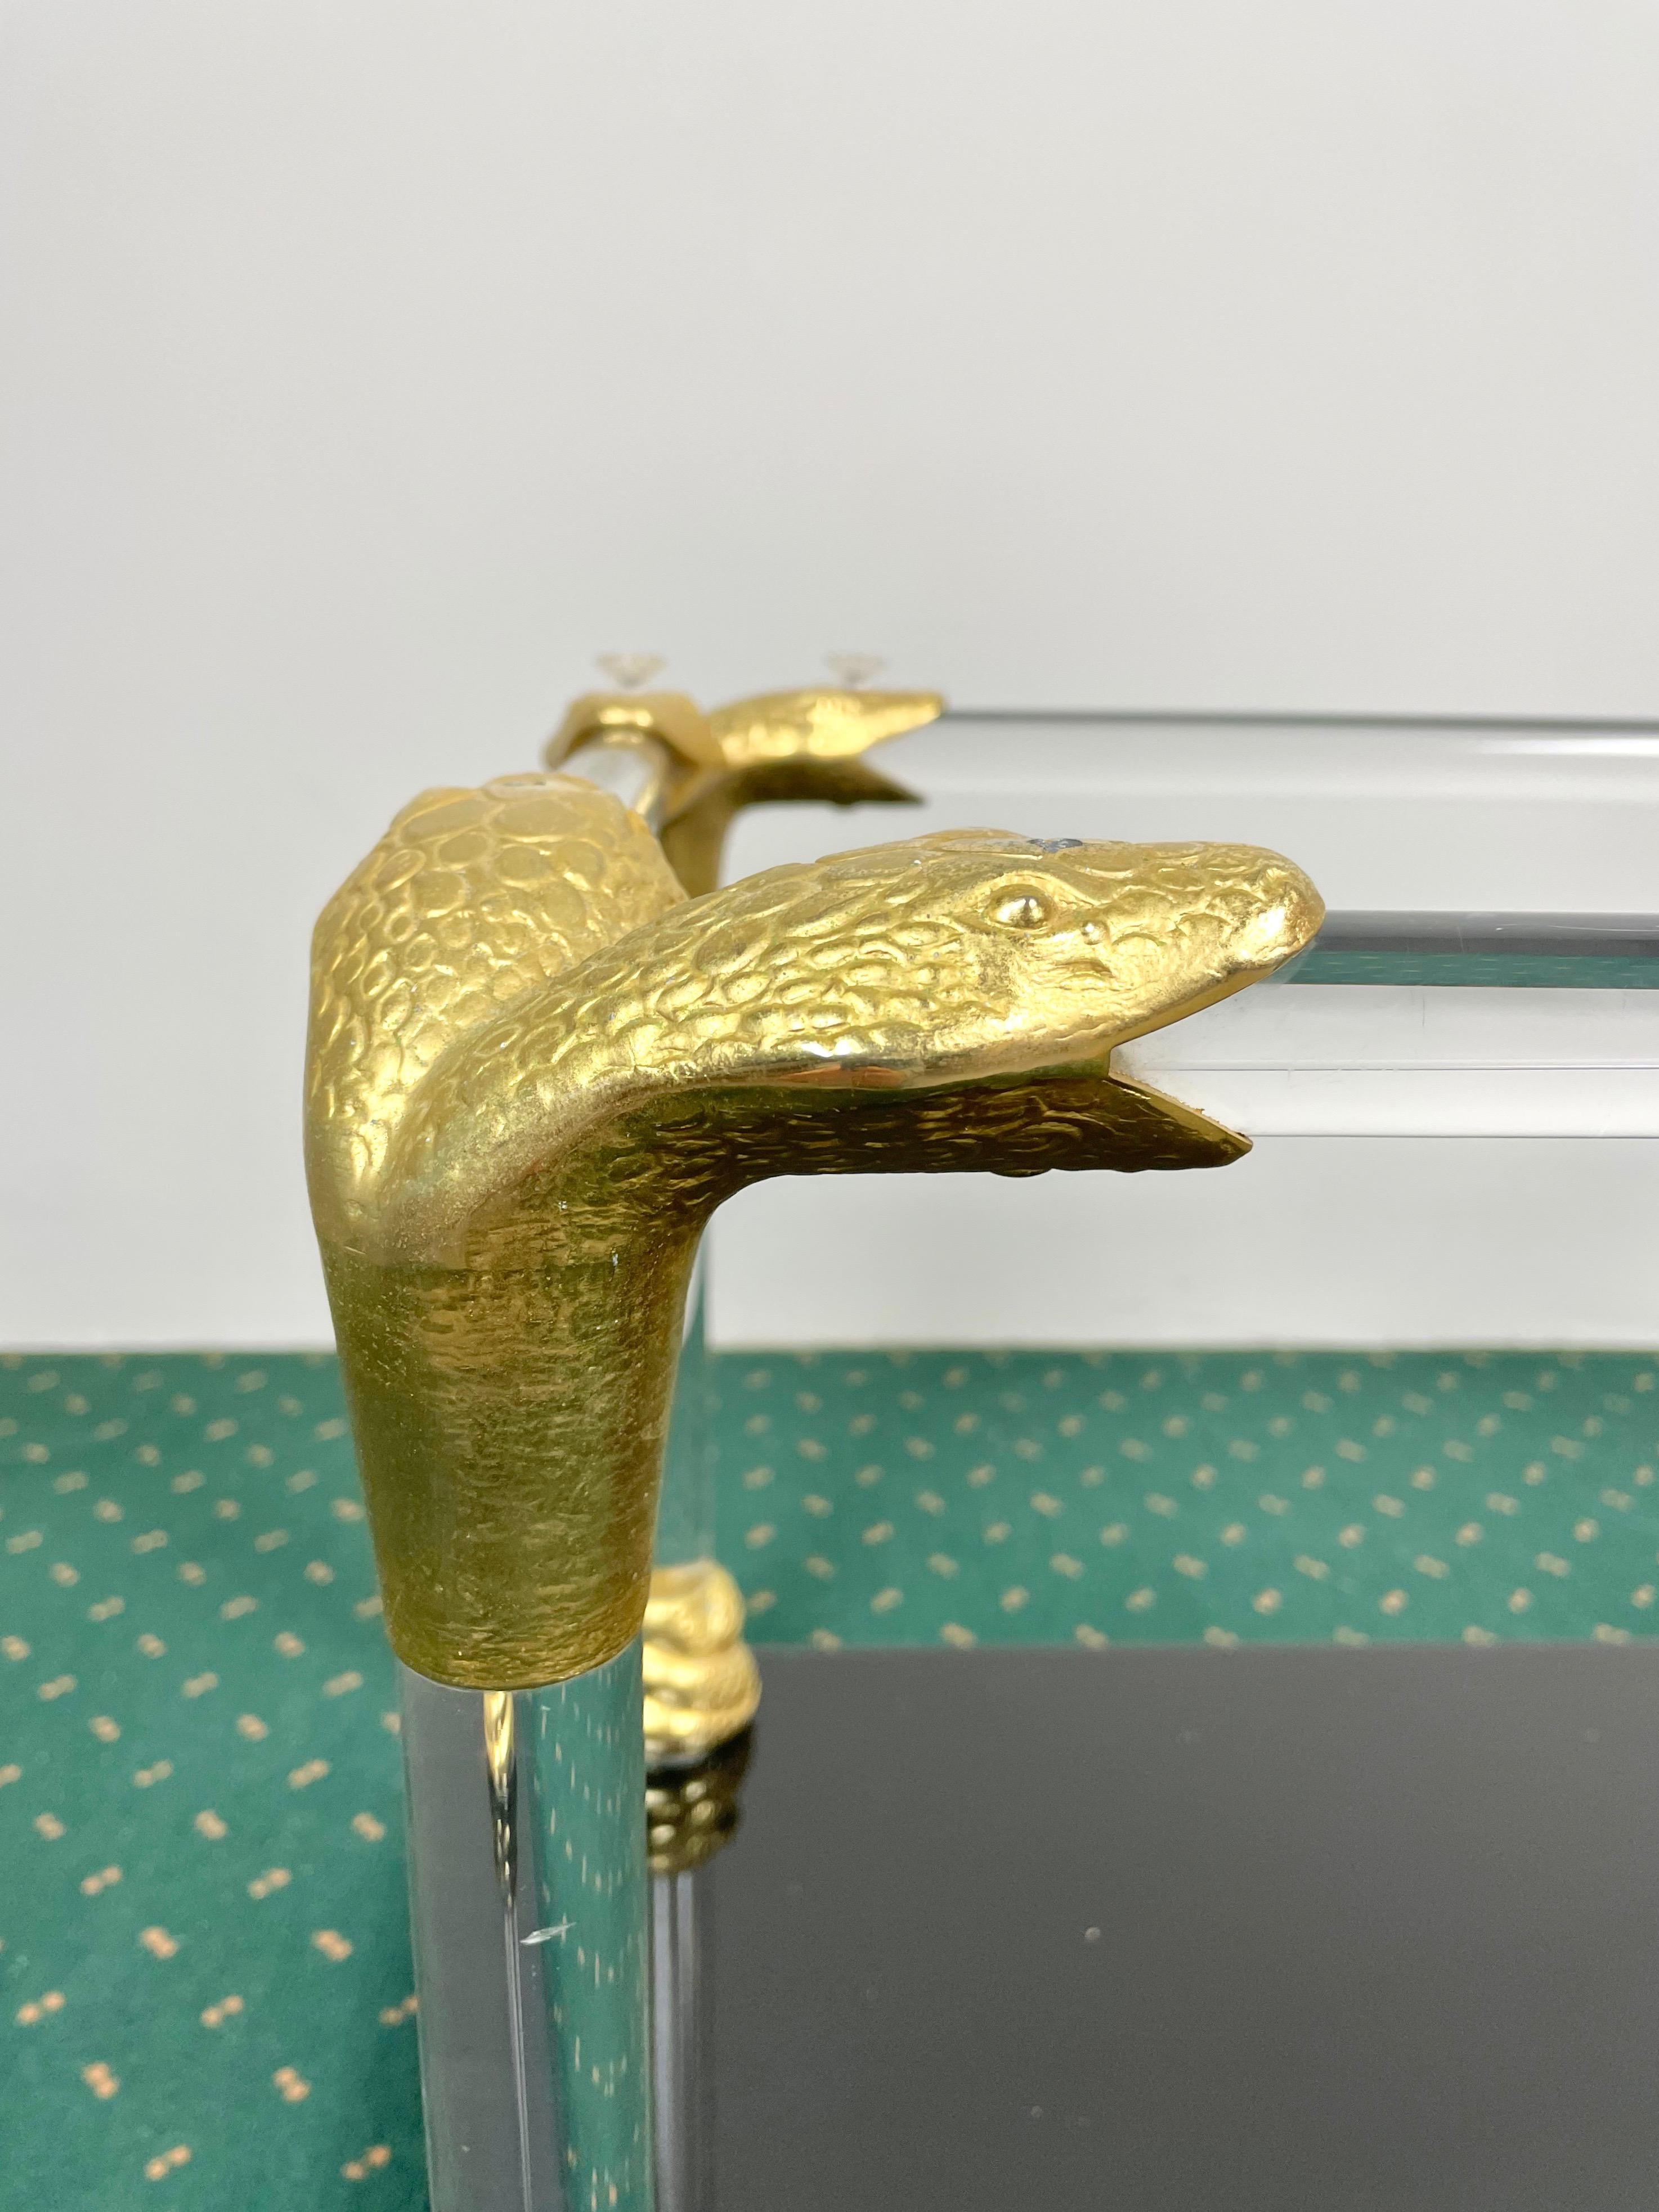 Lucite, Wood and Brass Coffee Table with Snake Head Details, Italy, 1970s For Sale 3